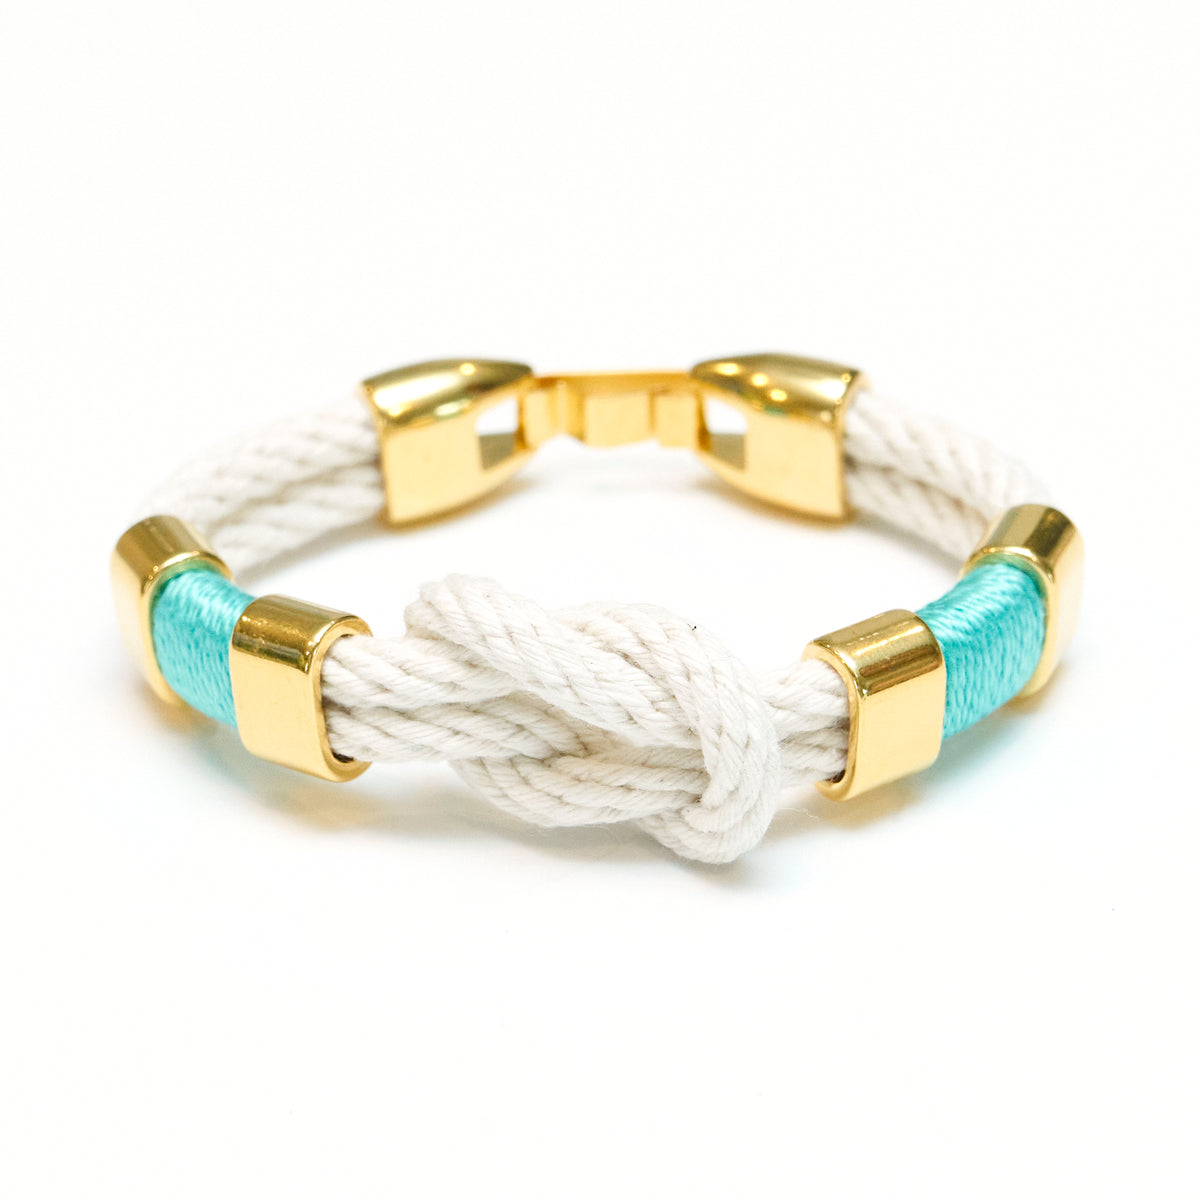 Allison Cole Jewelry - Starboard Bracelet - Ivory/ Turquoise/ Gold